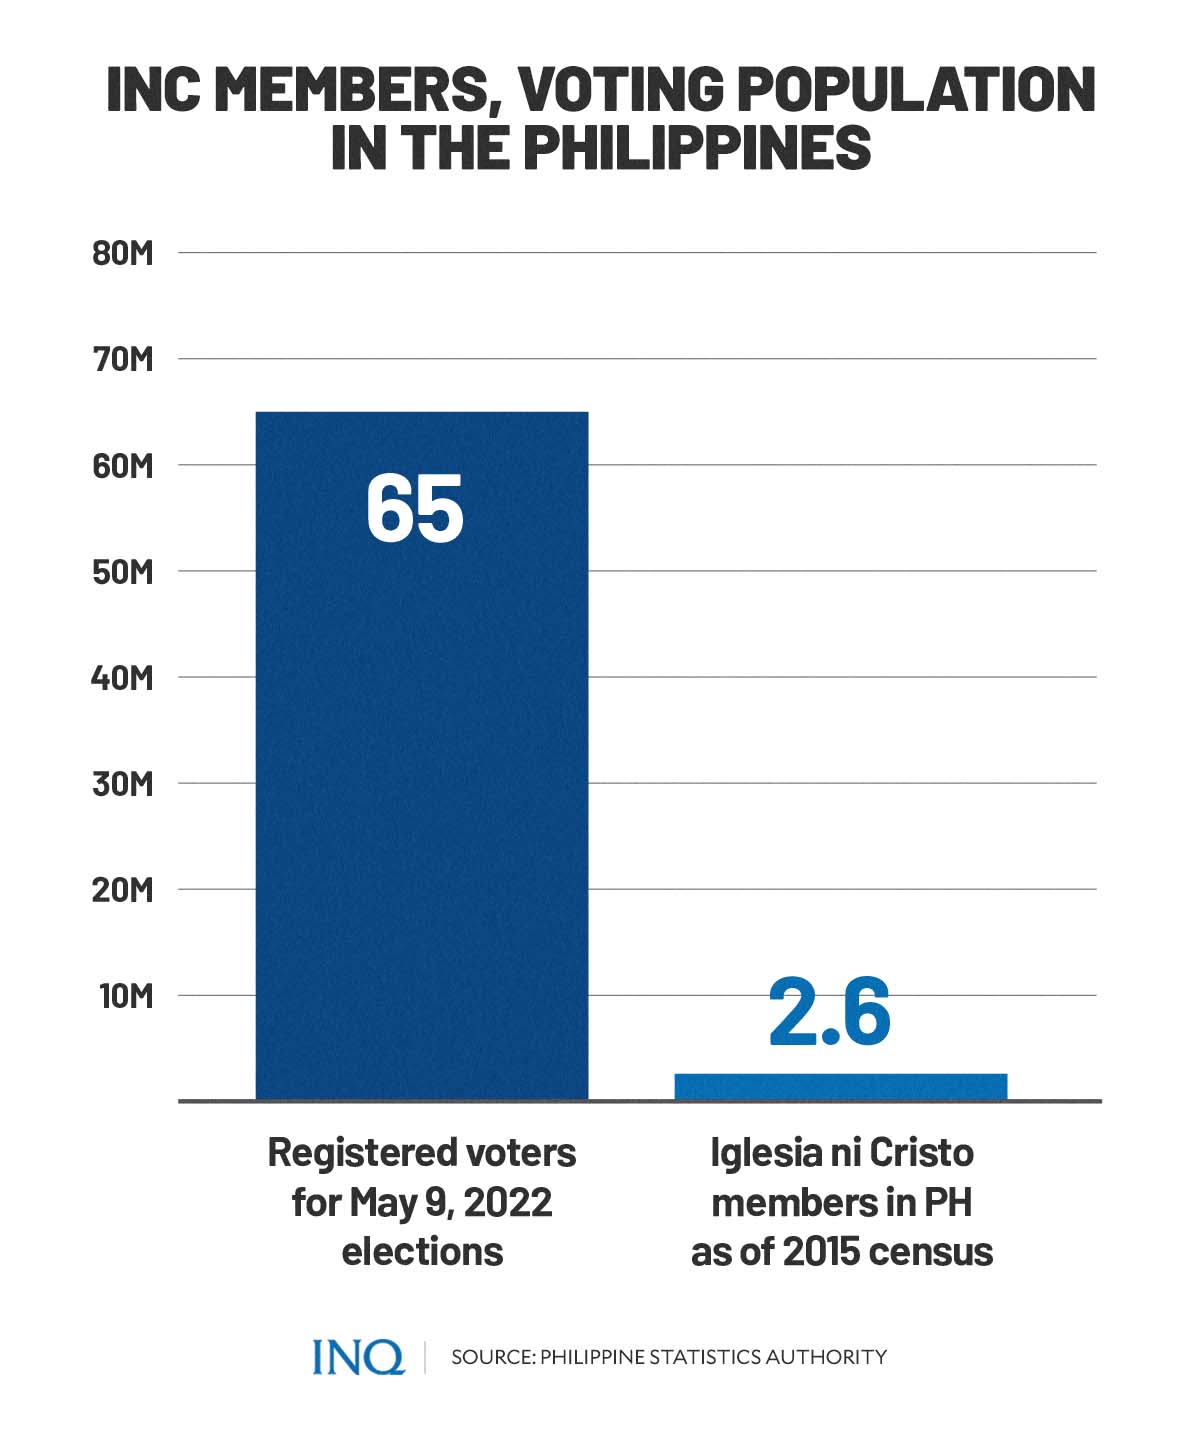 INC members voting population in the Philippines